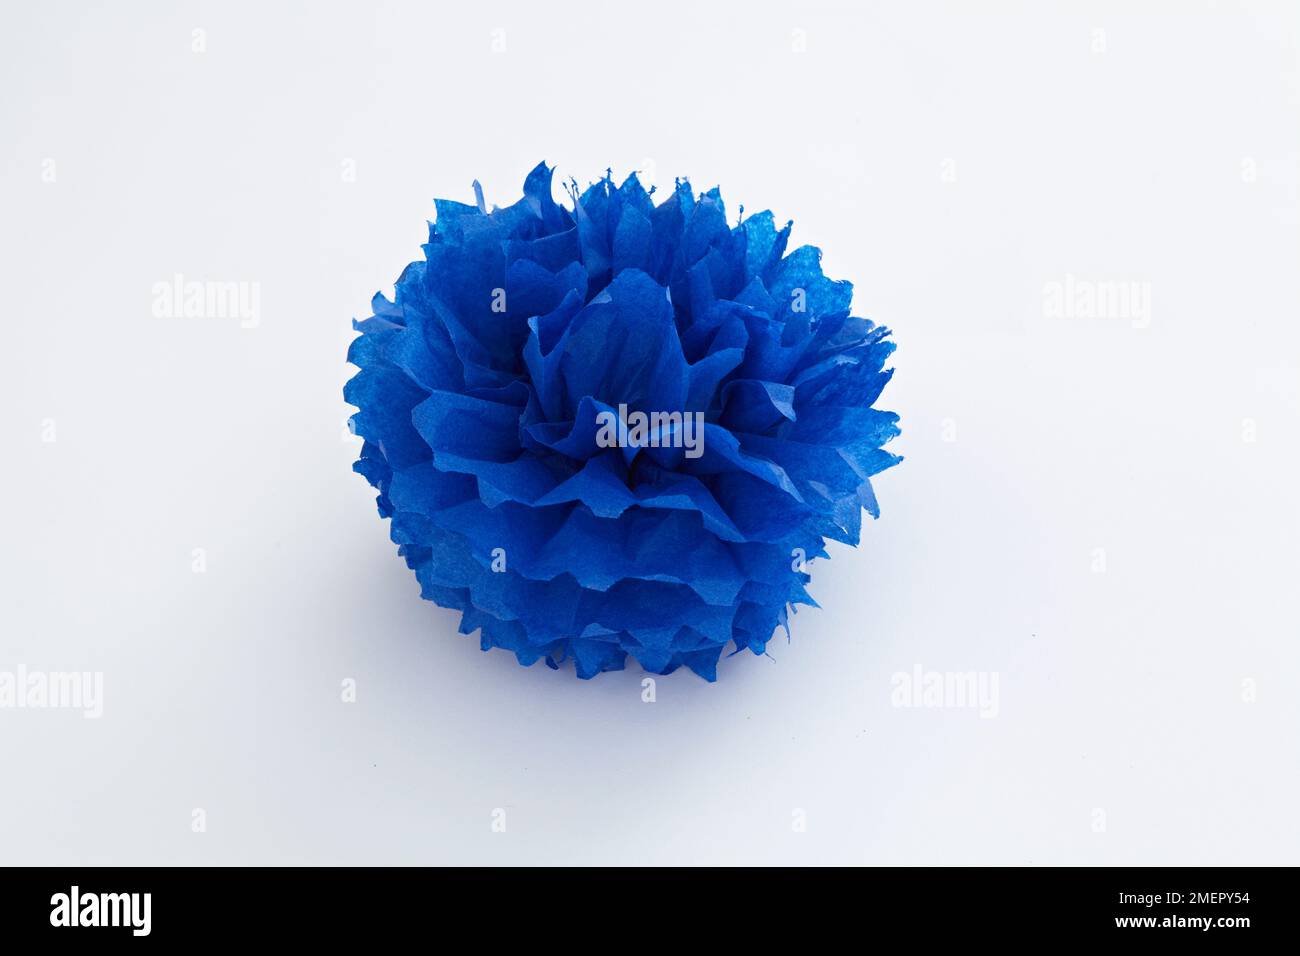 Blue tissue paper flower, close-up Stock Photo